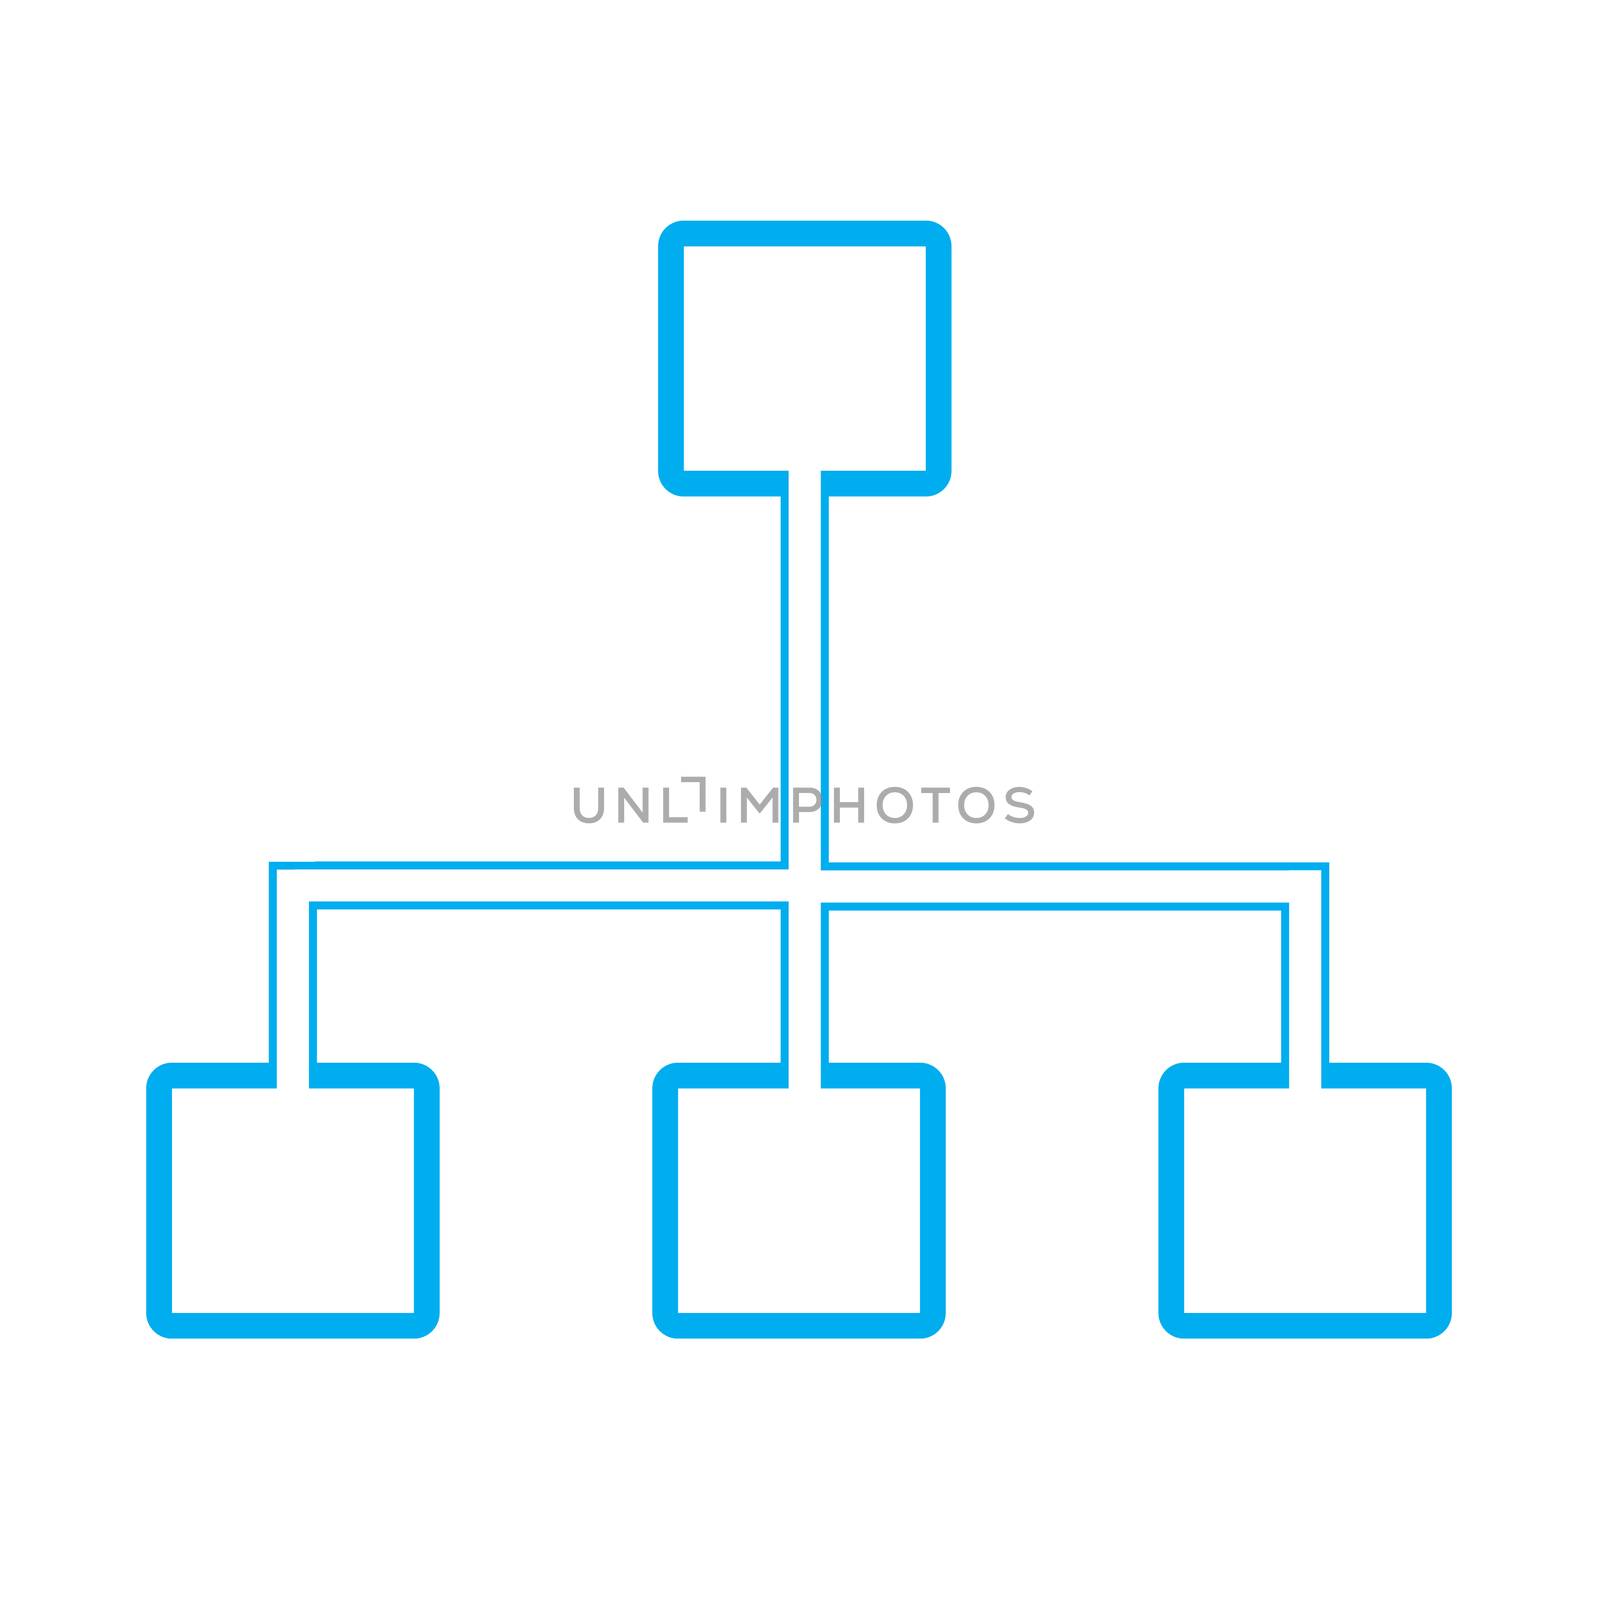 hierarchy icon on white background. hierarchy sign. flat style. organization chart icon for your web site design, logo, app, UI. structure symbol.